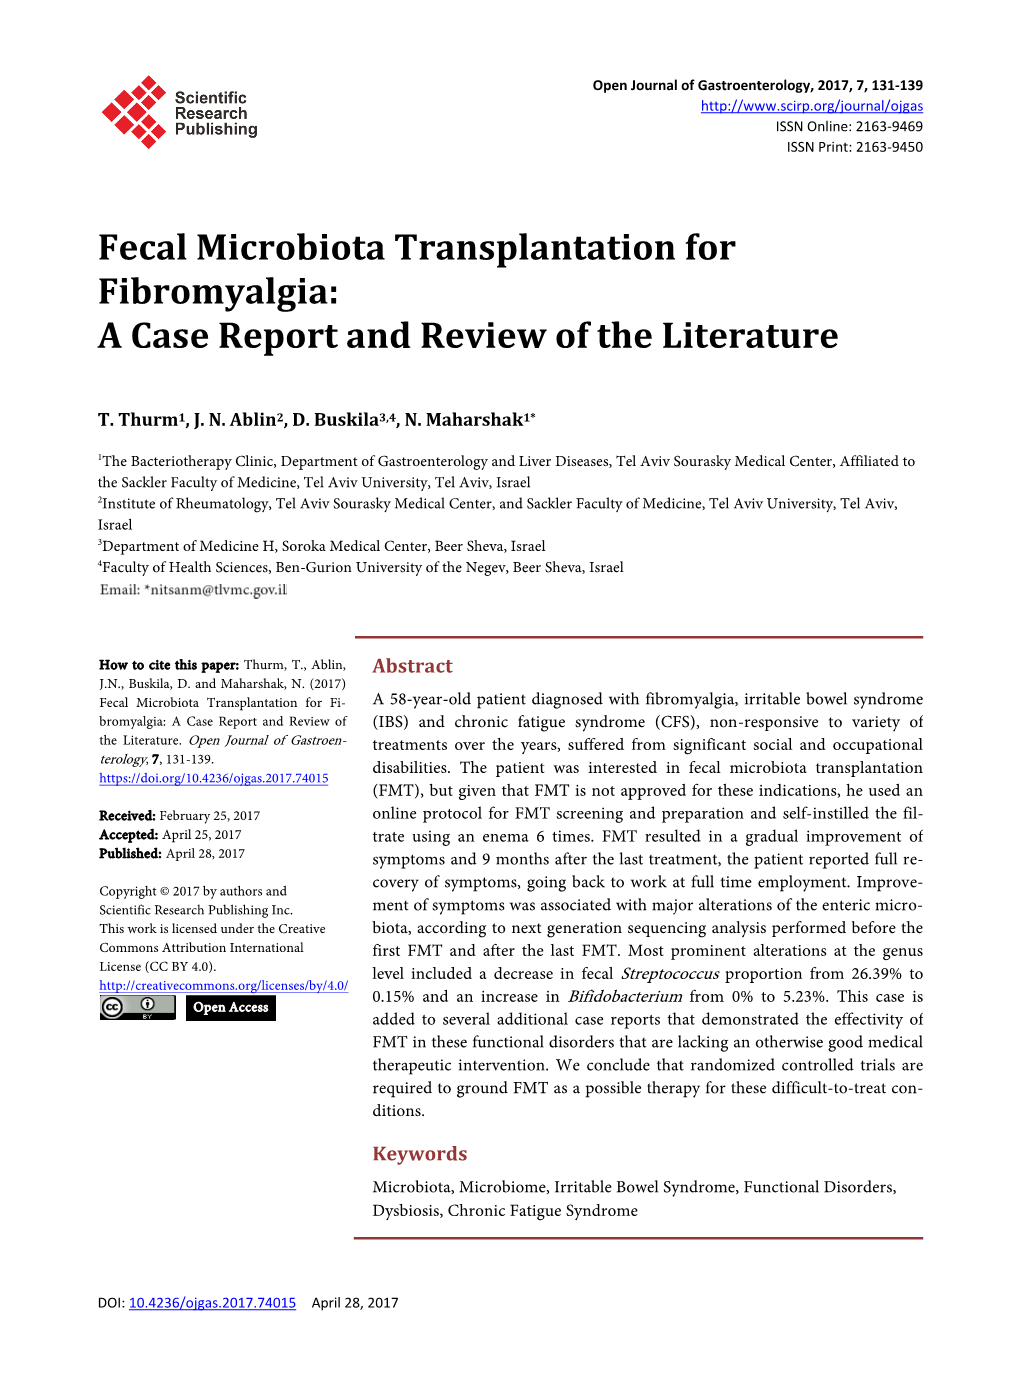 Fecal Microbiota Transplantation for Fibromyalgia: a Case Report and Review of the Literature